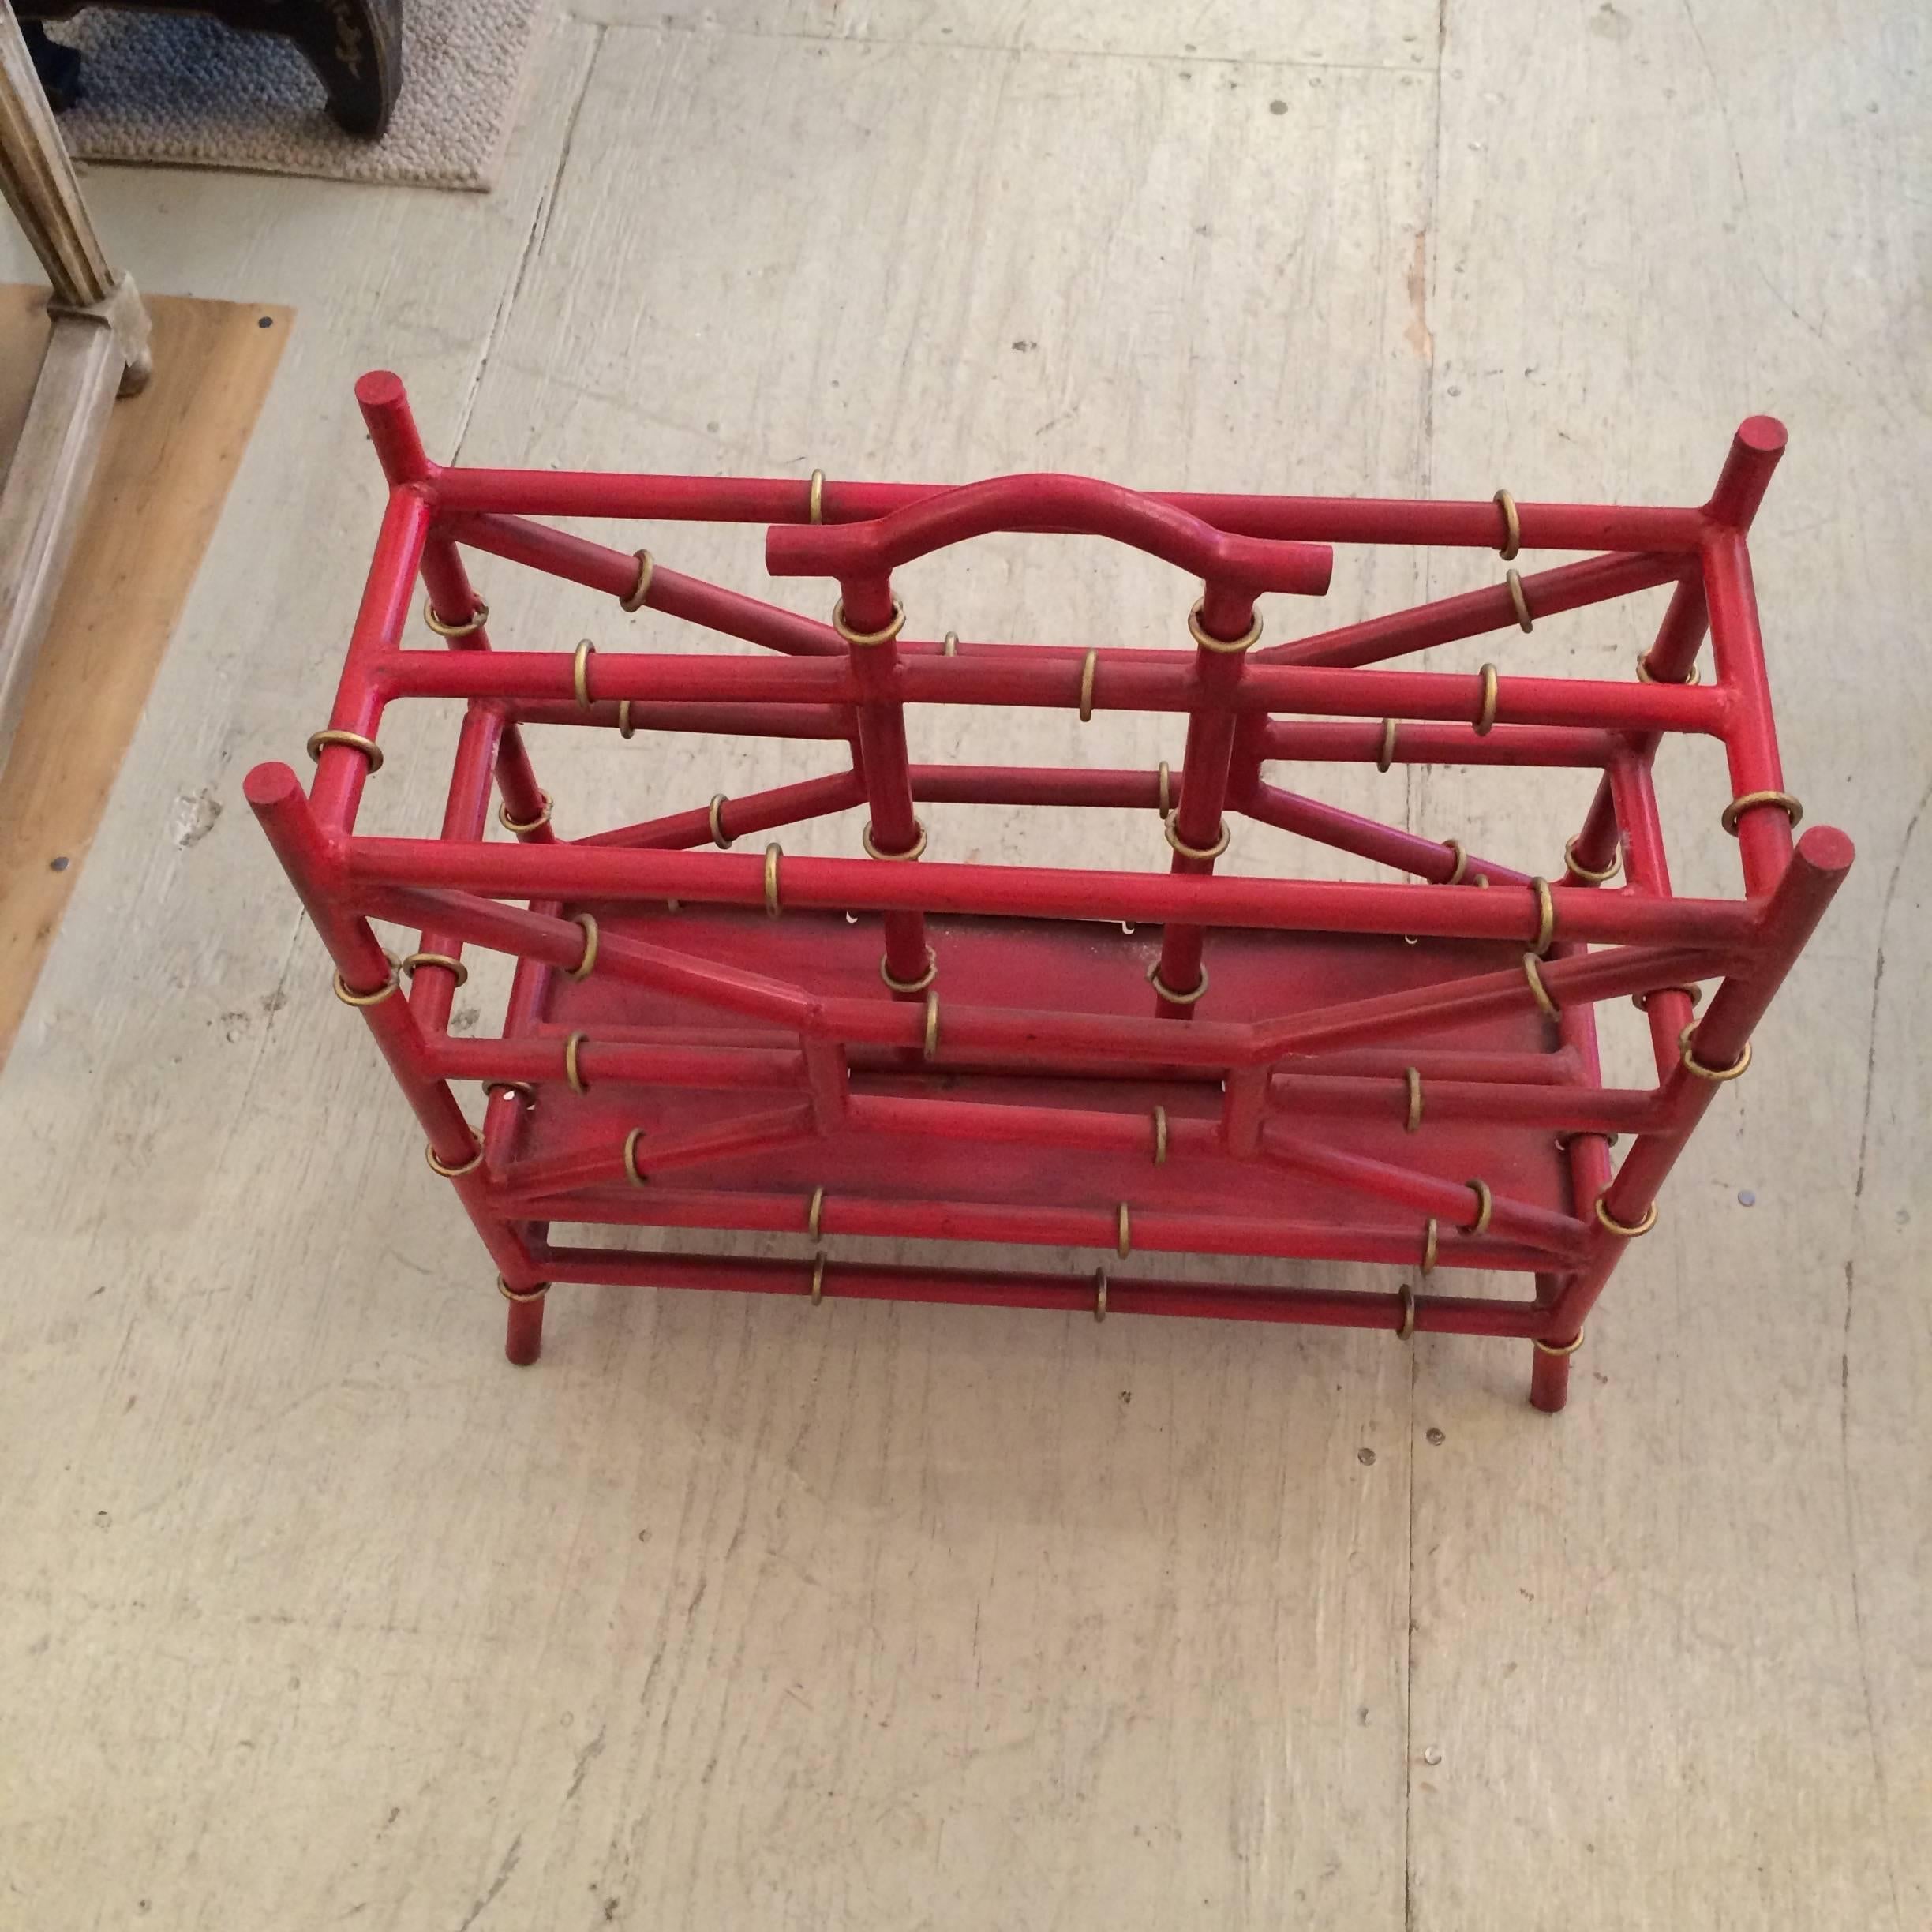 Fabulous magazine rack in bright coral red faux bamboo metal with gold detailing.